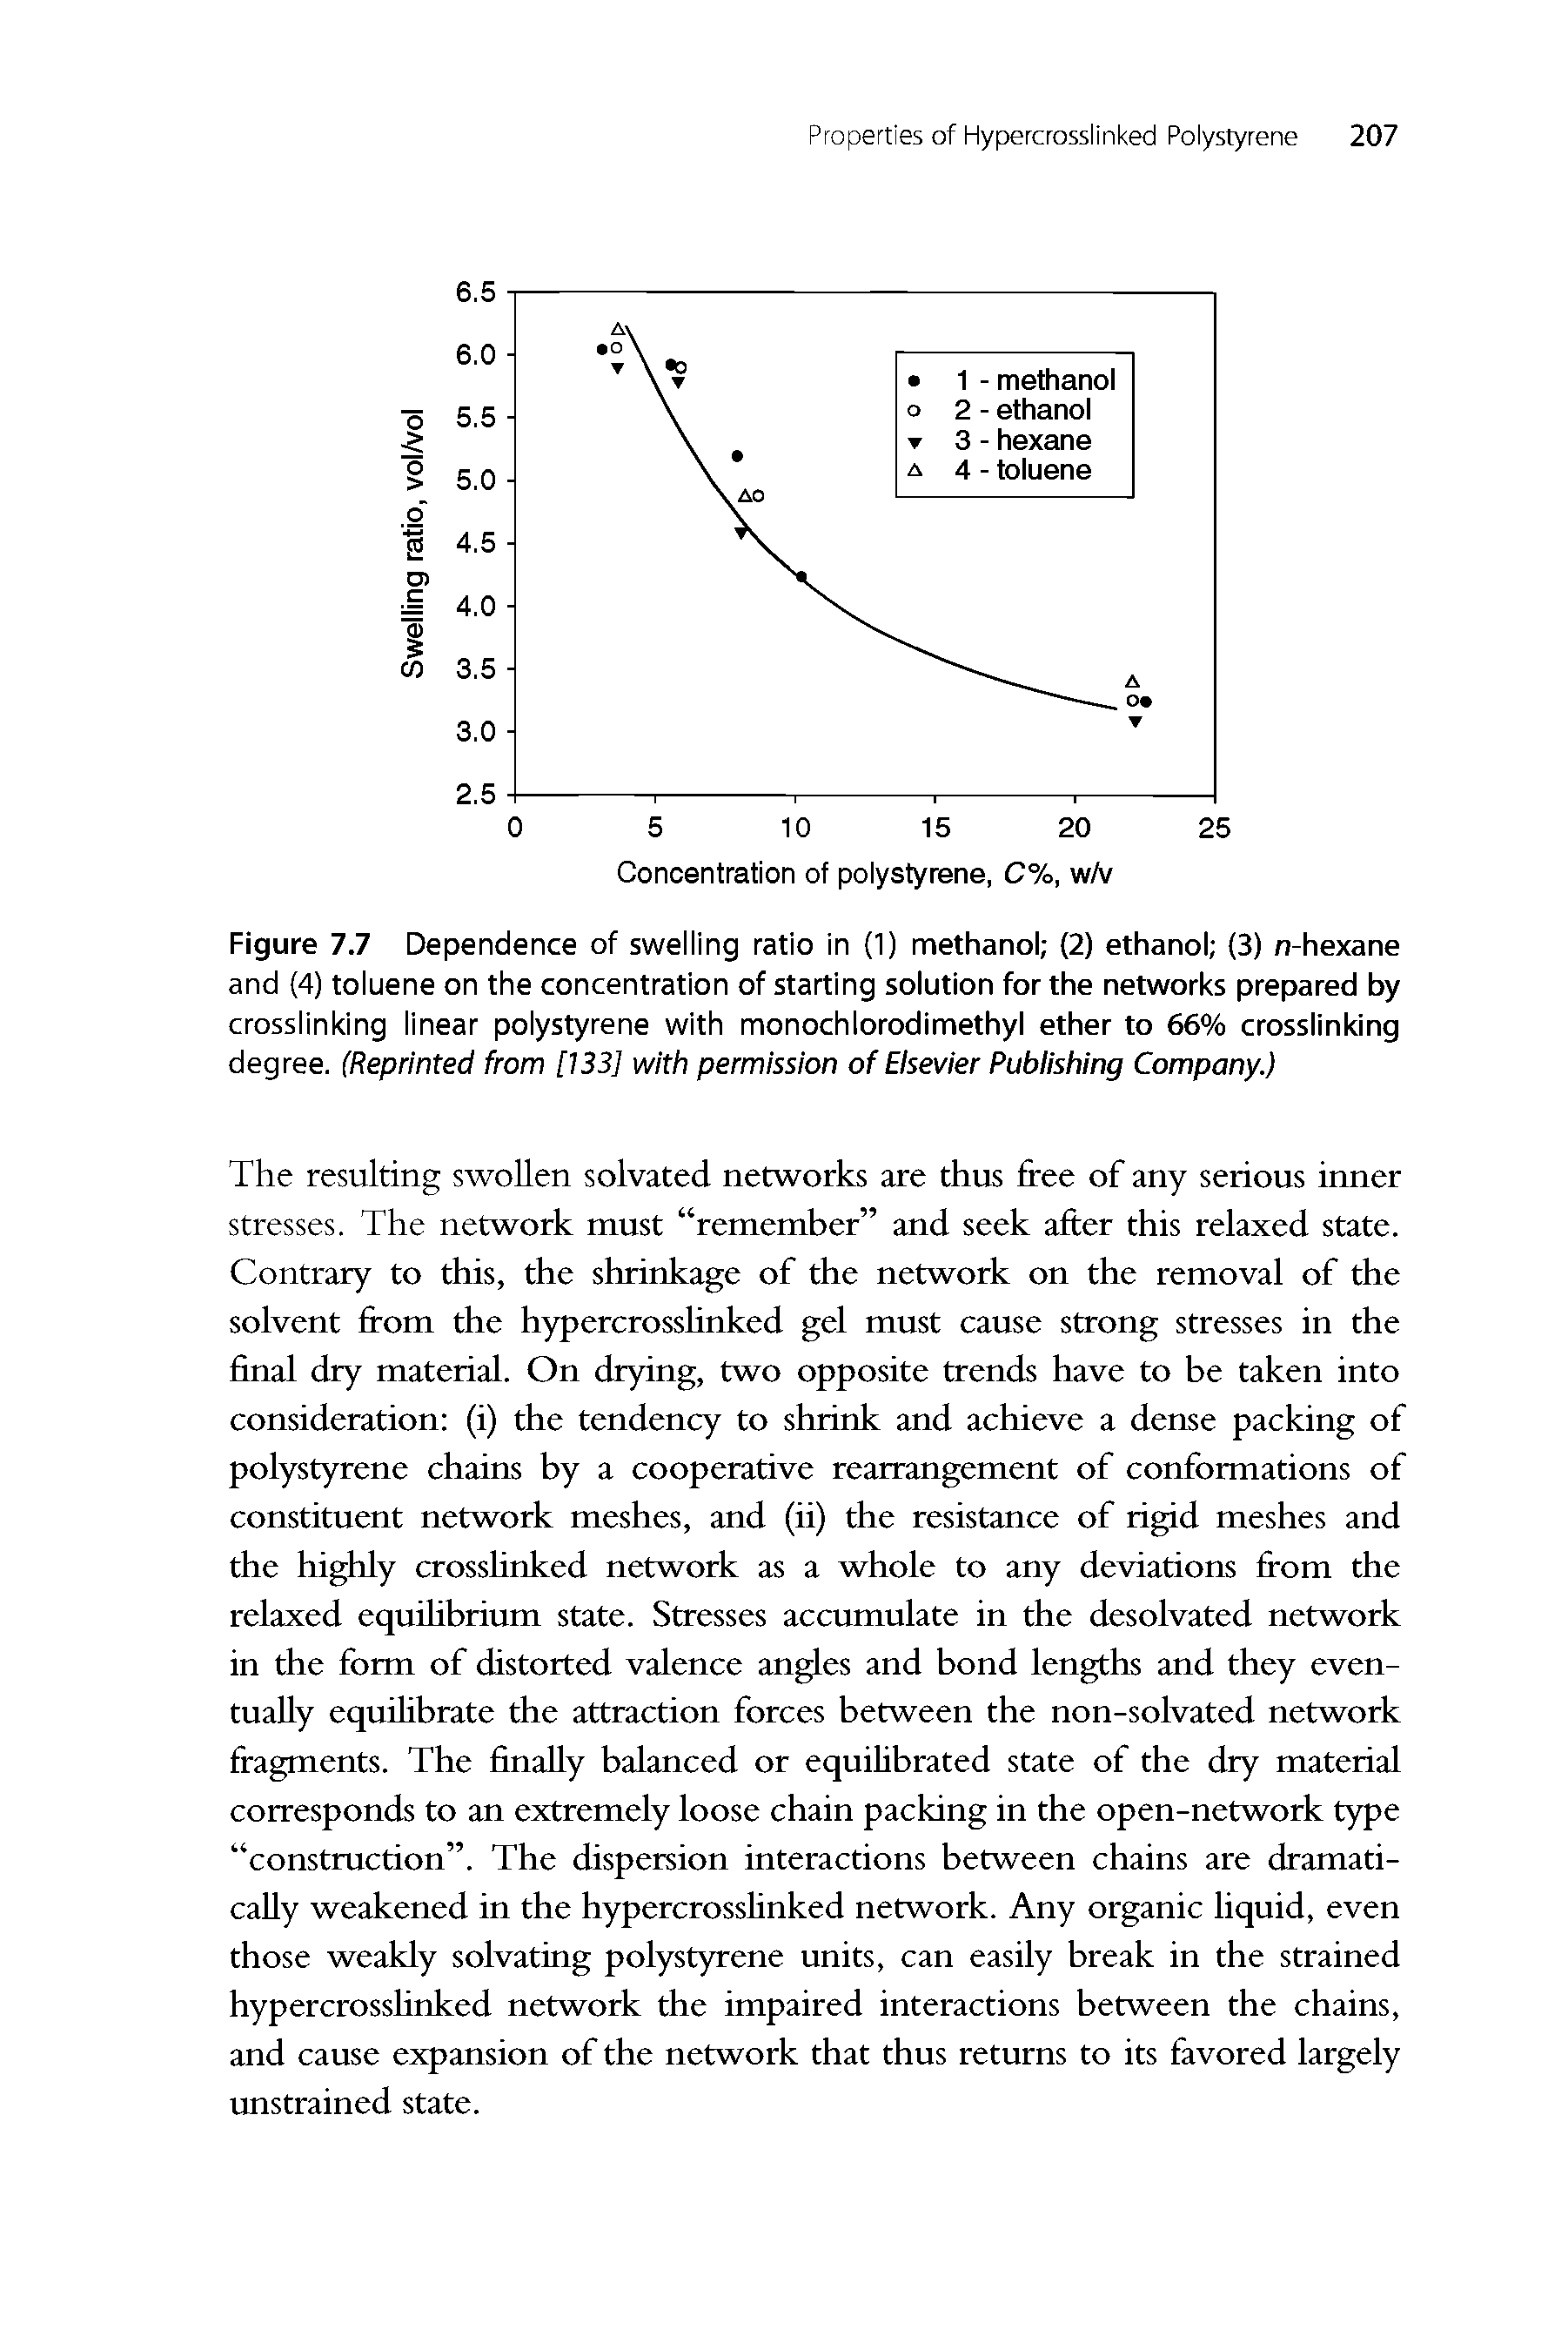 Figure 7.7 Dependence of swelling ratio in (1) methanol (2) ethanol (3) n-hexane and (4) toluene on the concentration of starting solution for the networks prepared by crosslinking linear polystyrene with monochlorodimethyl ether to 66% crosslinking degree. (Reprinted from [133] with permission of Elsevier Publishing Company.)...